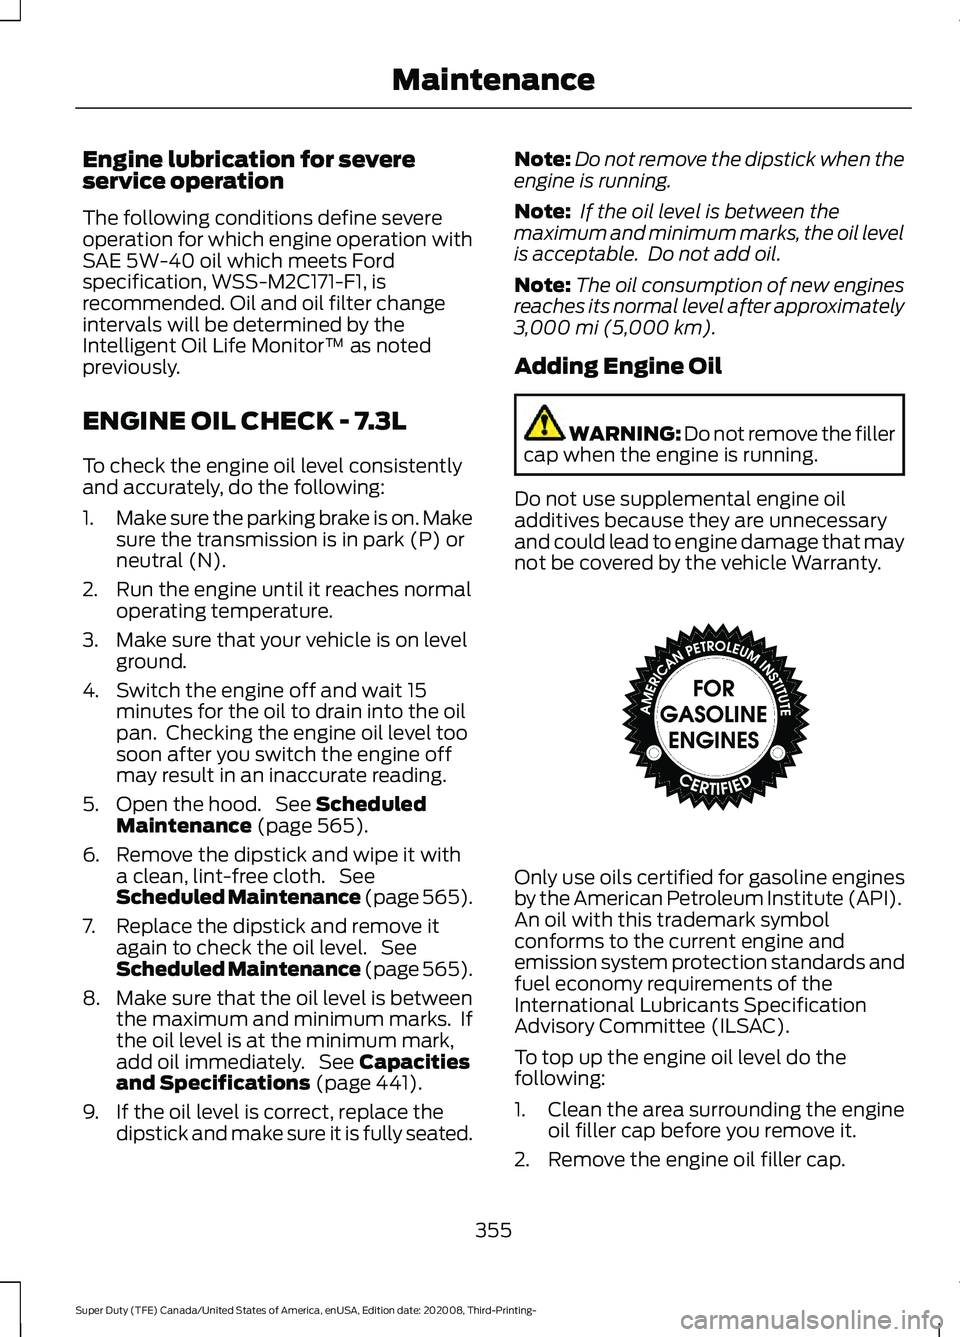 FORD F-450 2021  Owners Manual Engine lubrication for severe
service operation
The following conditions define severe
operation for which engine operation with
SAE 5W-40 oil which meets Ford
specification, WSS-M2C171-F1, is
recomme